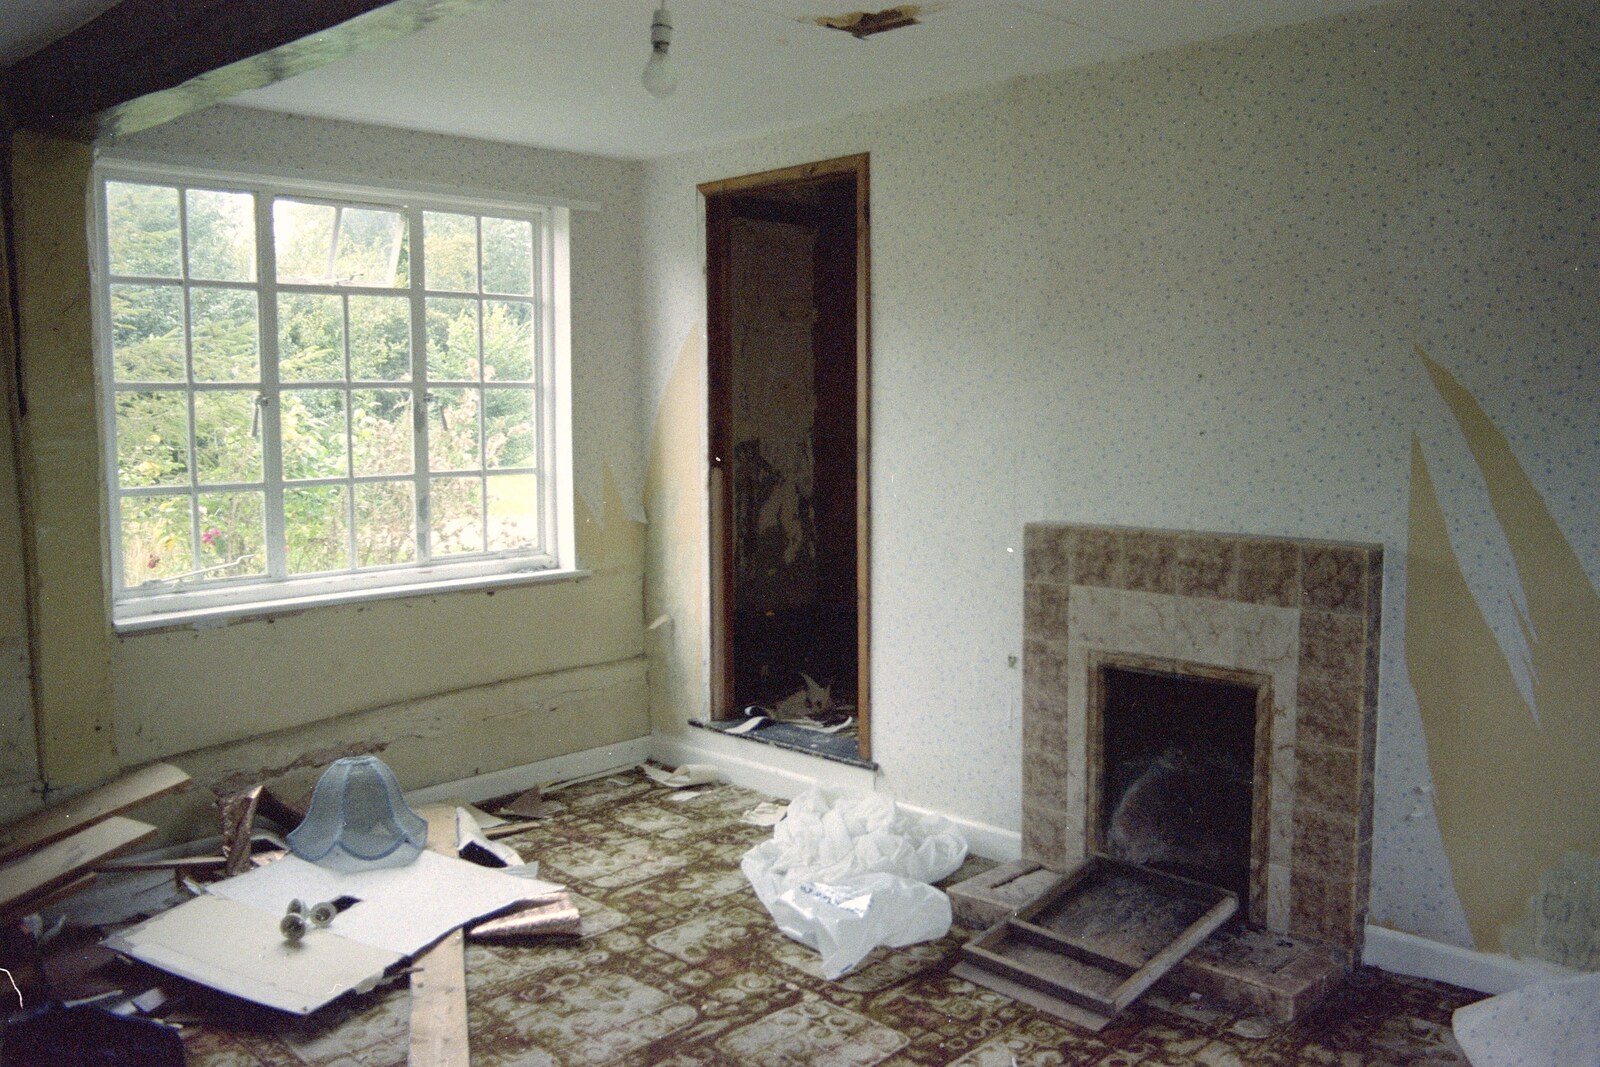 The 1950s fireplace and a gold-wallpapered nook from Moving In, Brome, Suffolk - 10th April 1994